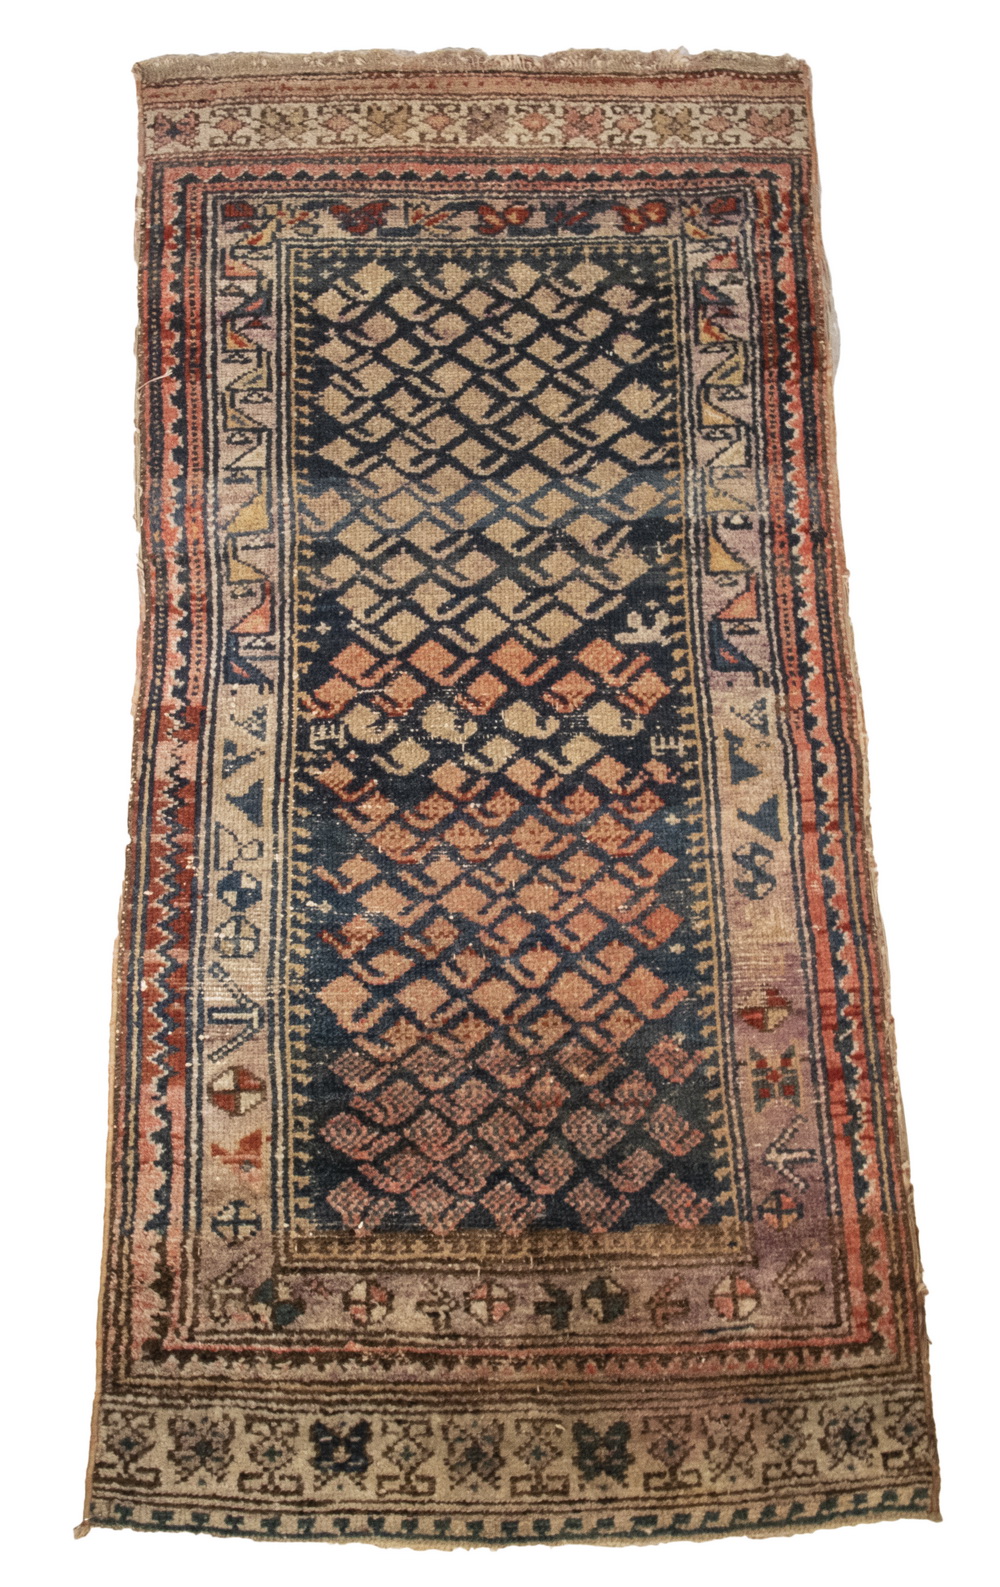 KURD RUG Staggered rows of boteh